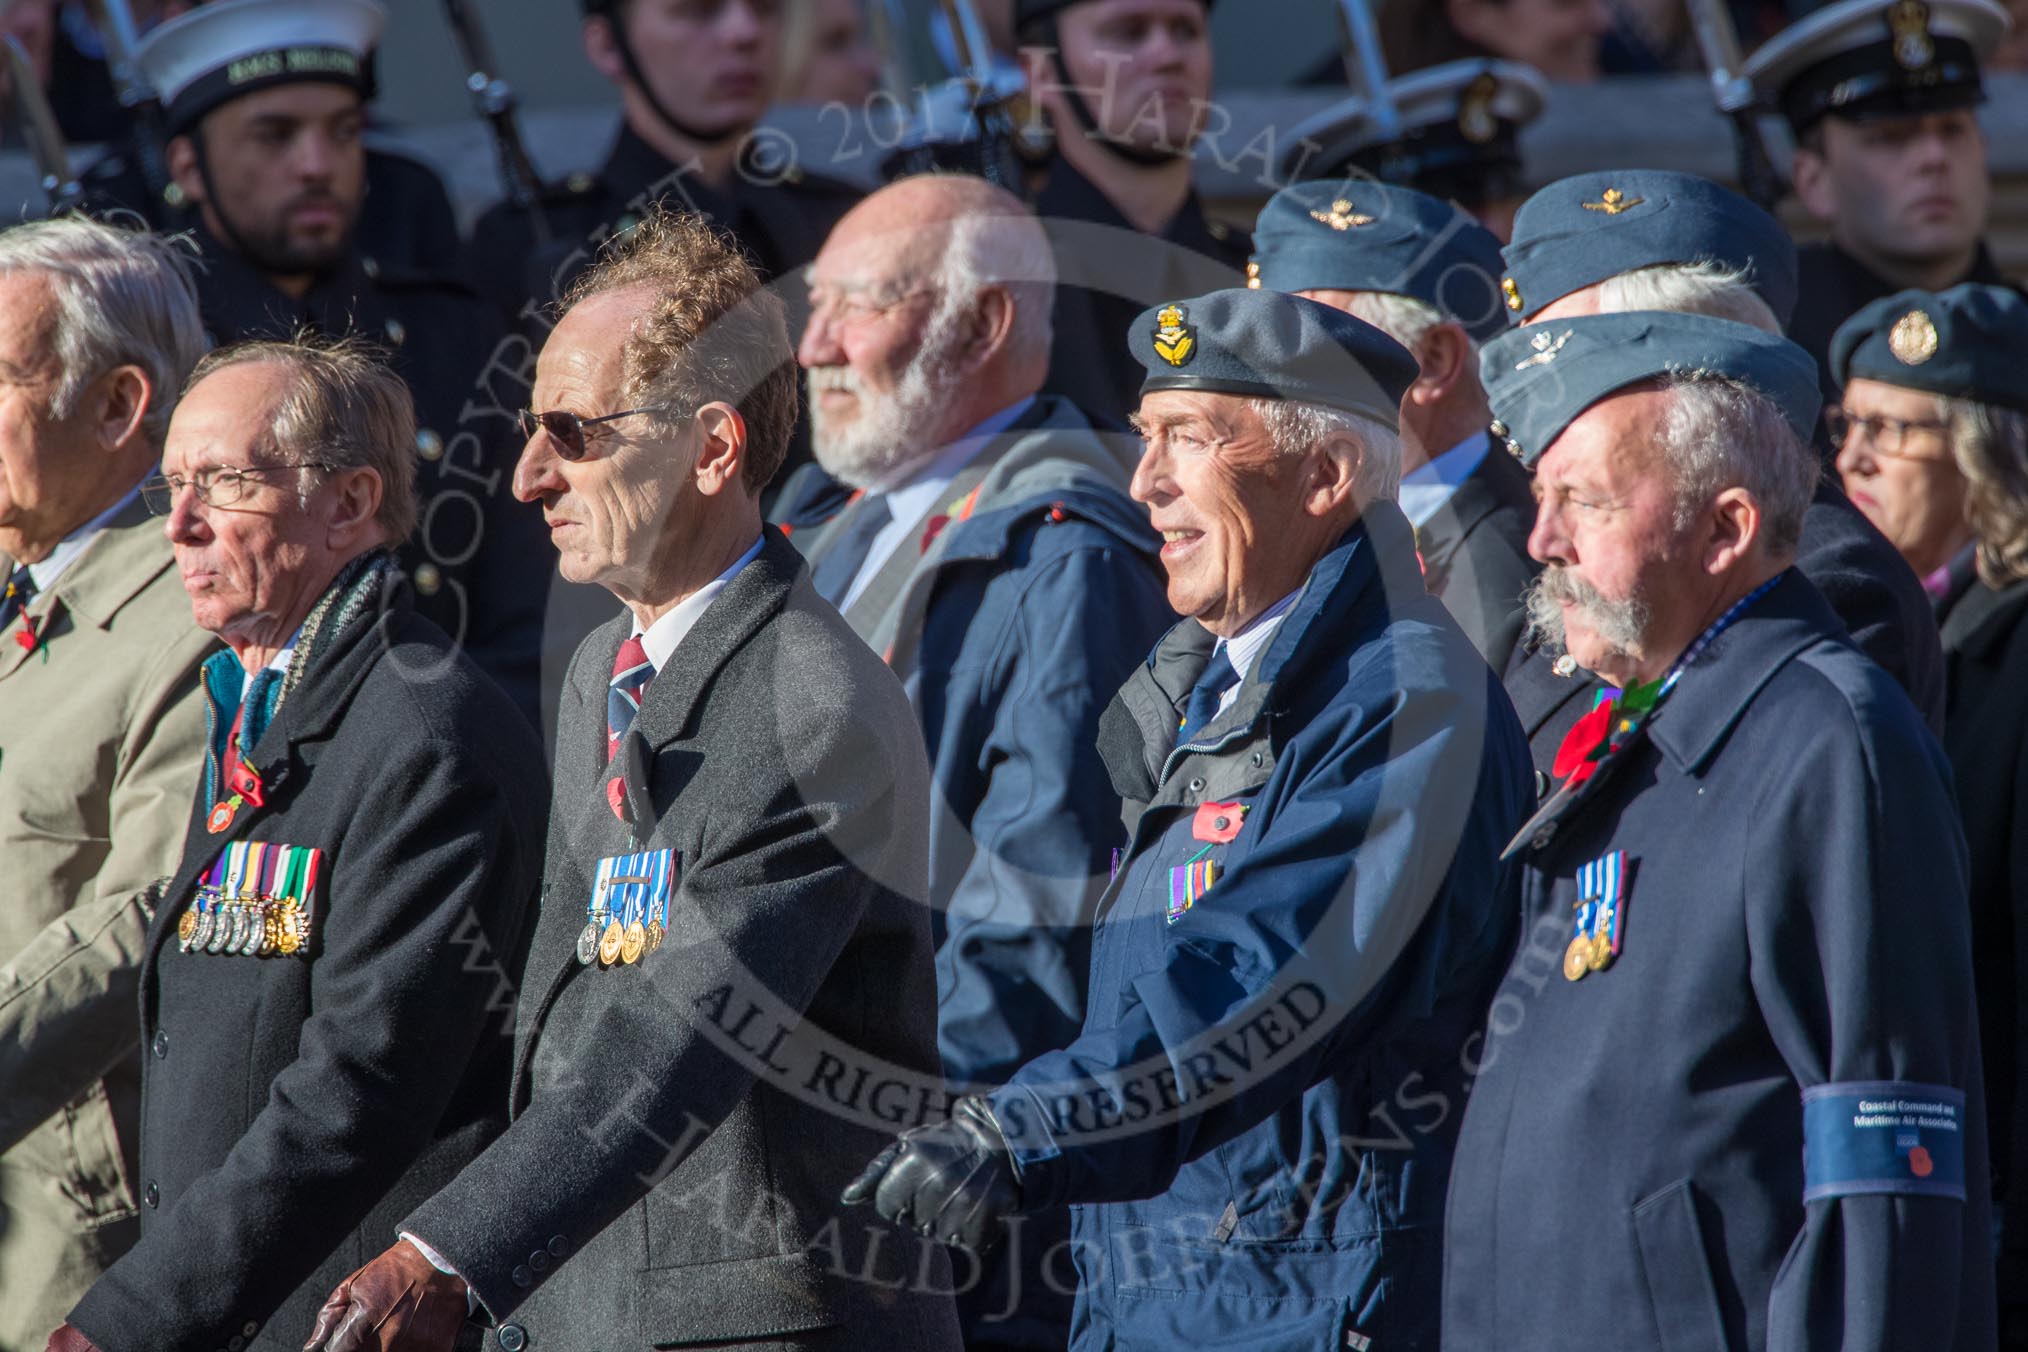 Coastal Command and Maritime Air Association (CCMAA) (Group C18, 21 members) during the Royal British Legion March Past on Remembrance Sunday at the Cenotaph, Whitehall, Westminster, London, 11 November 2018, 12:17